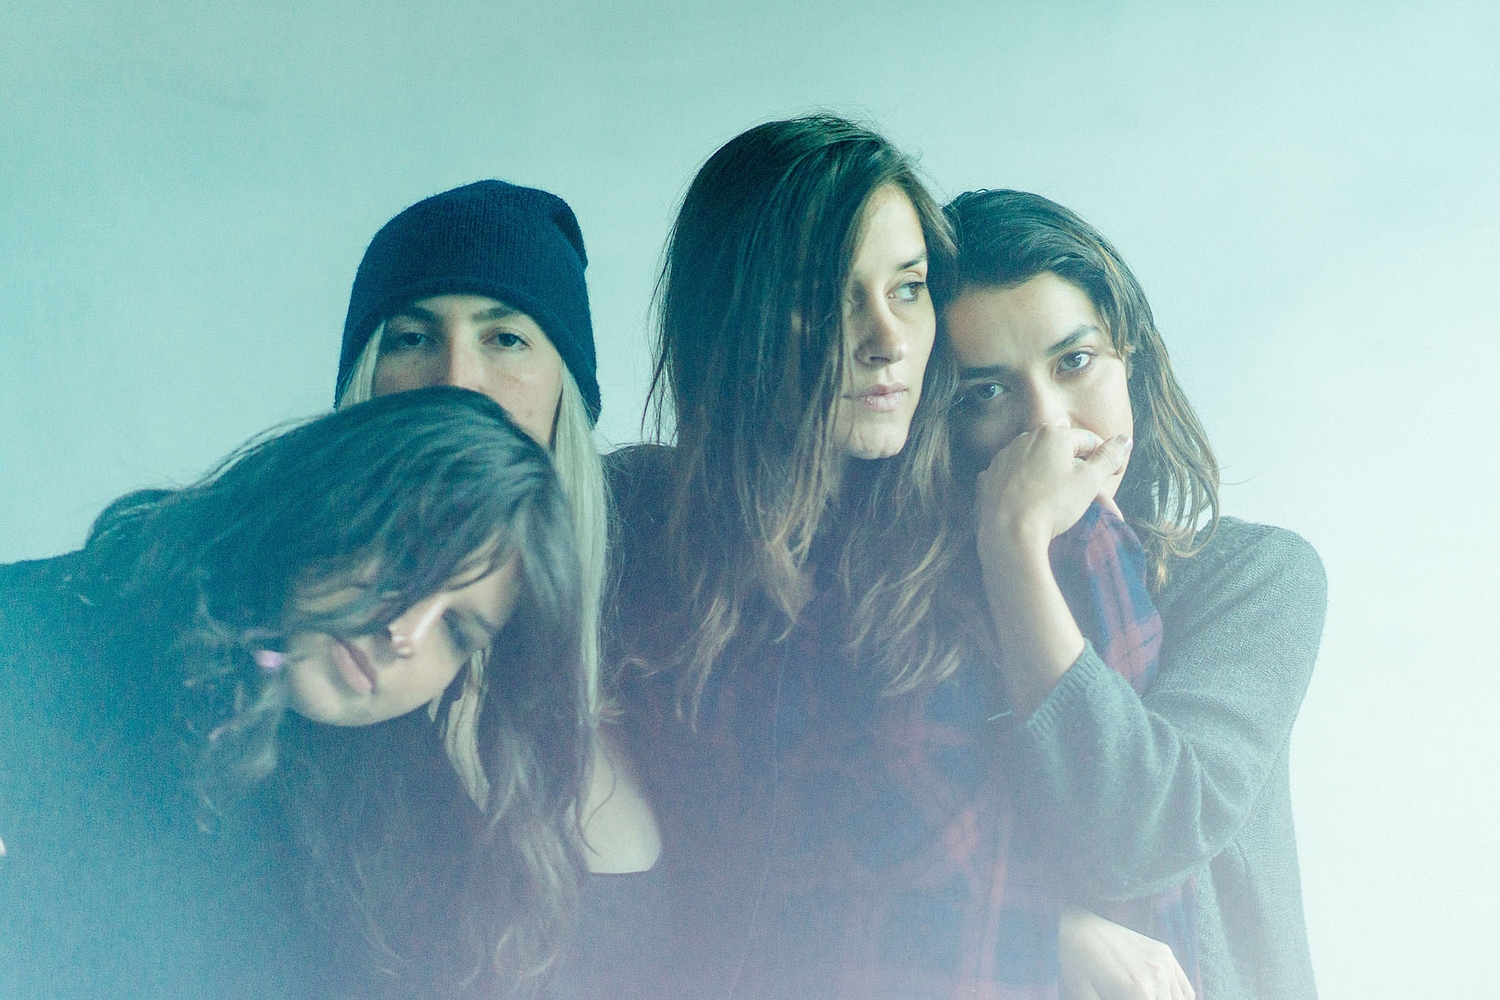 “Things are a little more dancey,” on the new Warpaint album, says Stella Mozgawa